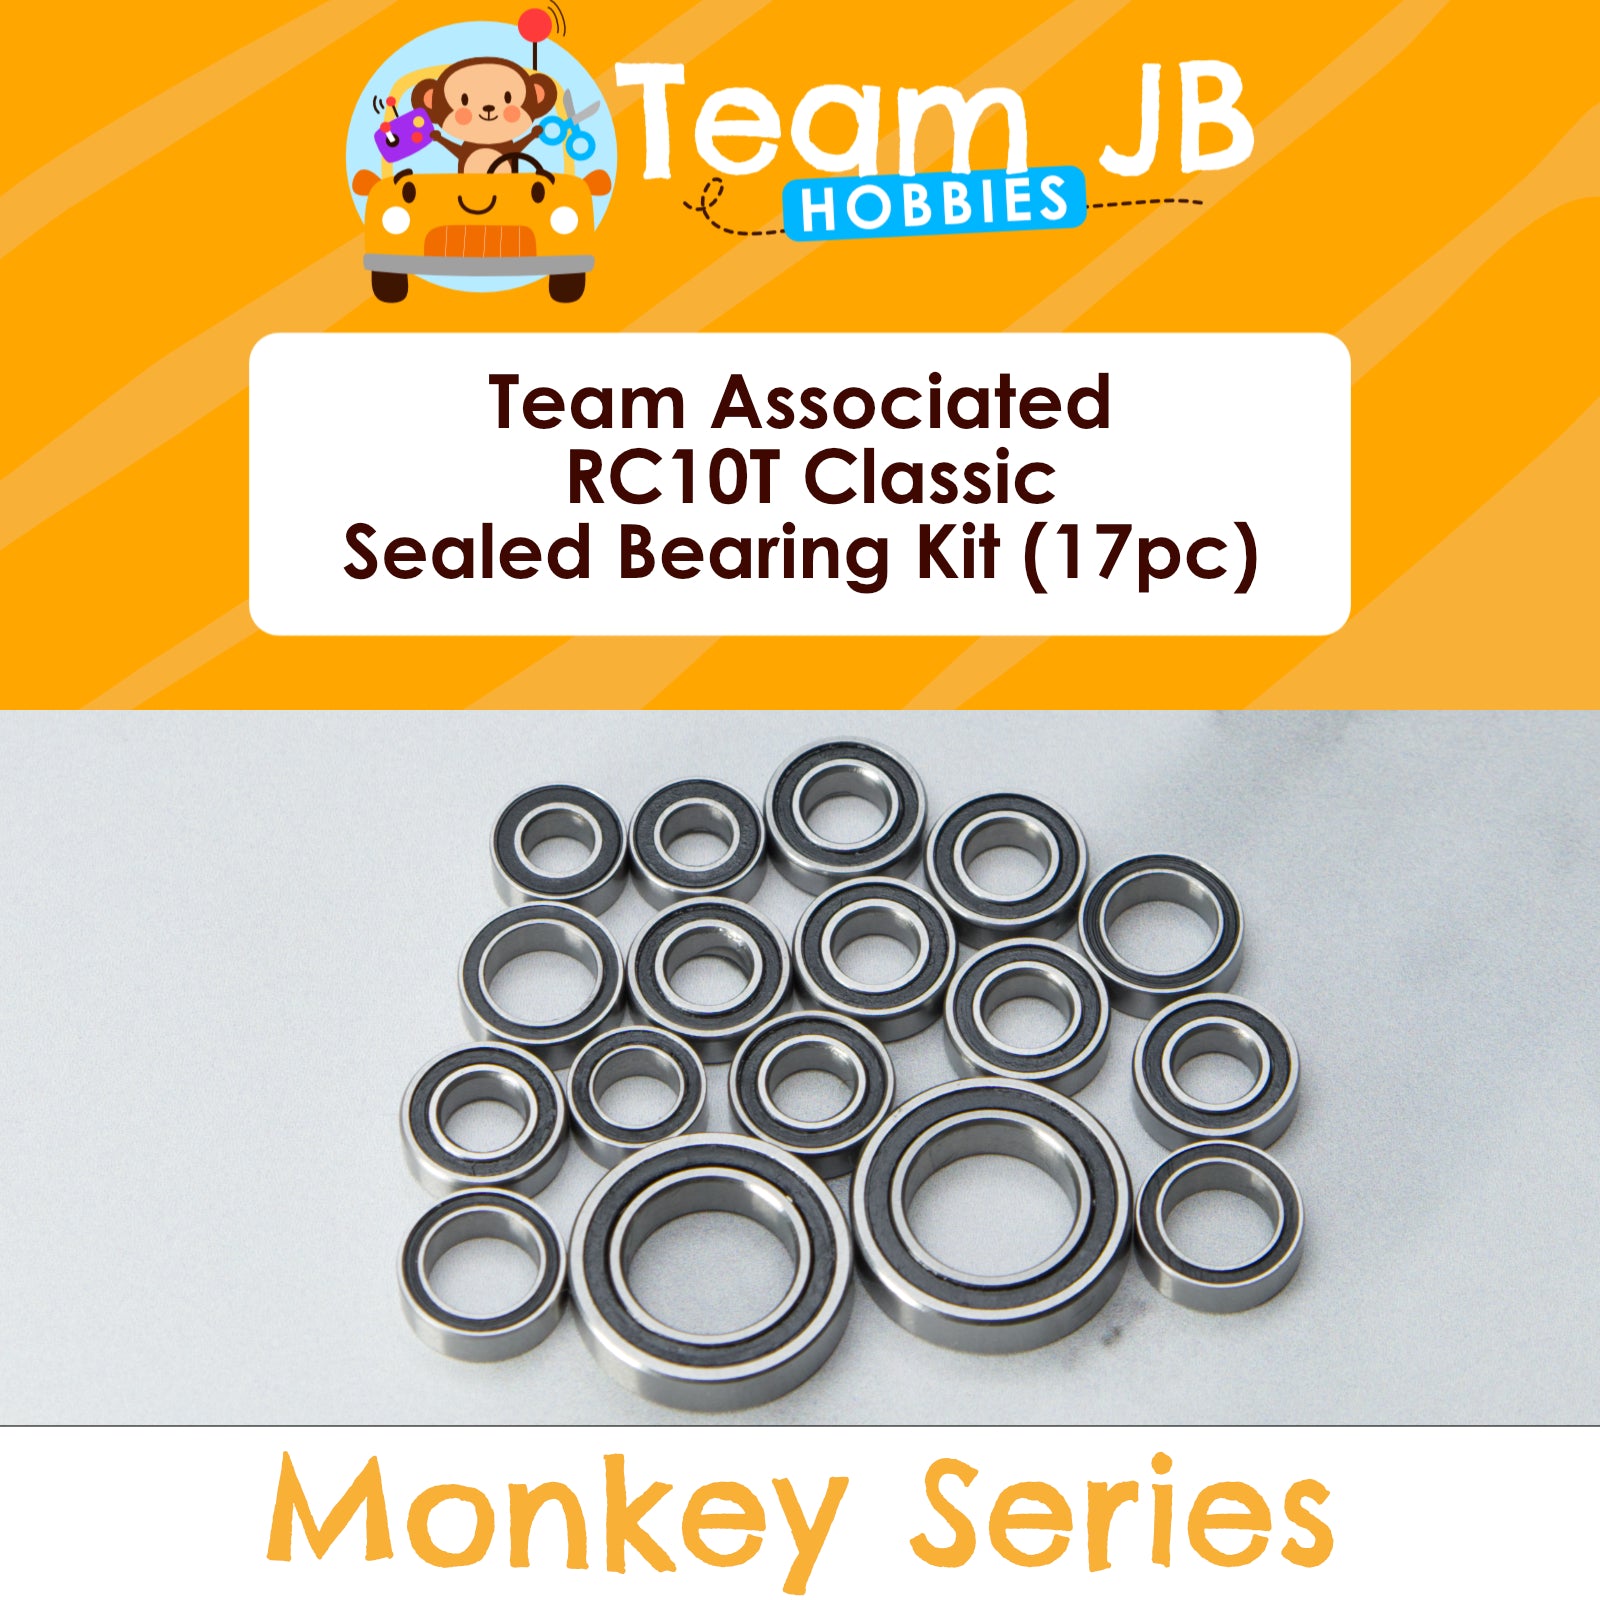 Team Associated RC10T Classic - Sealed Bearing Kit